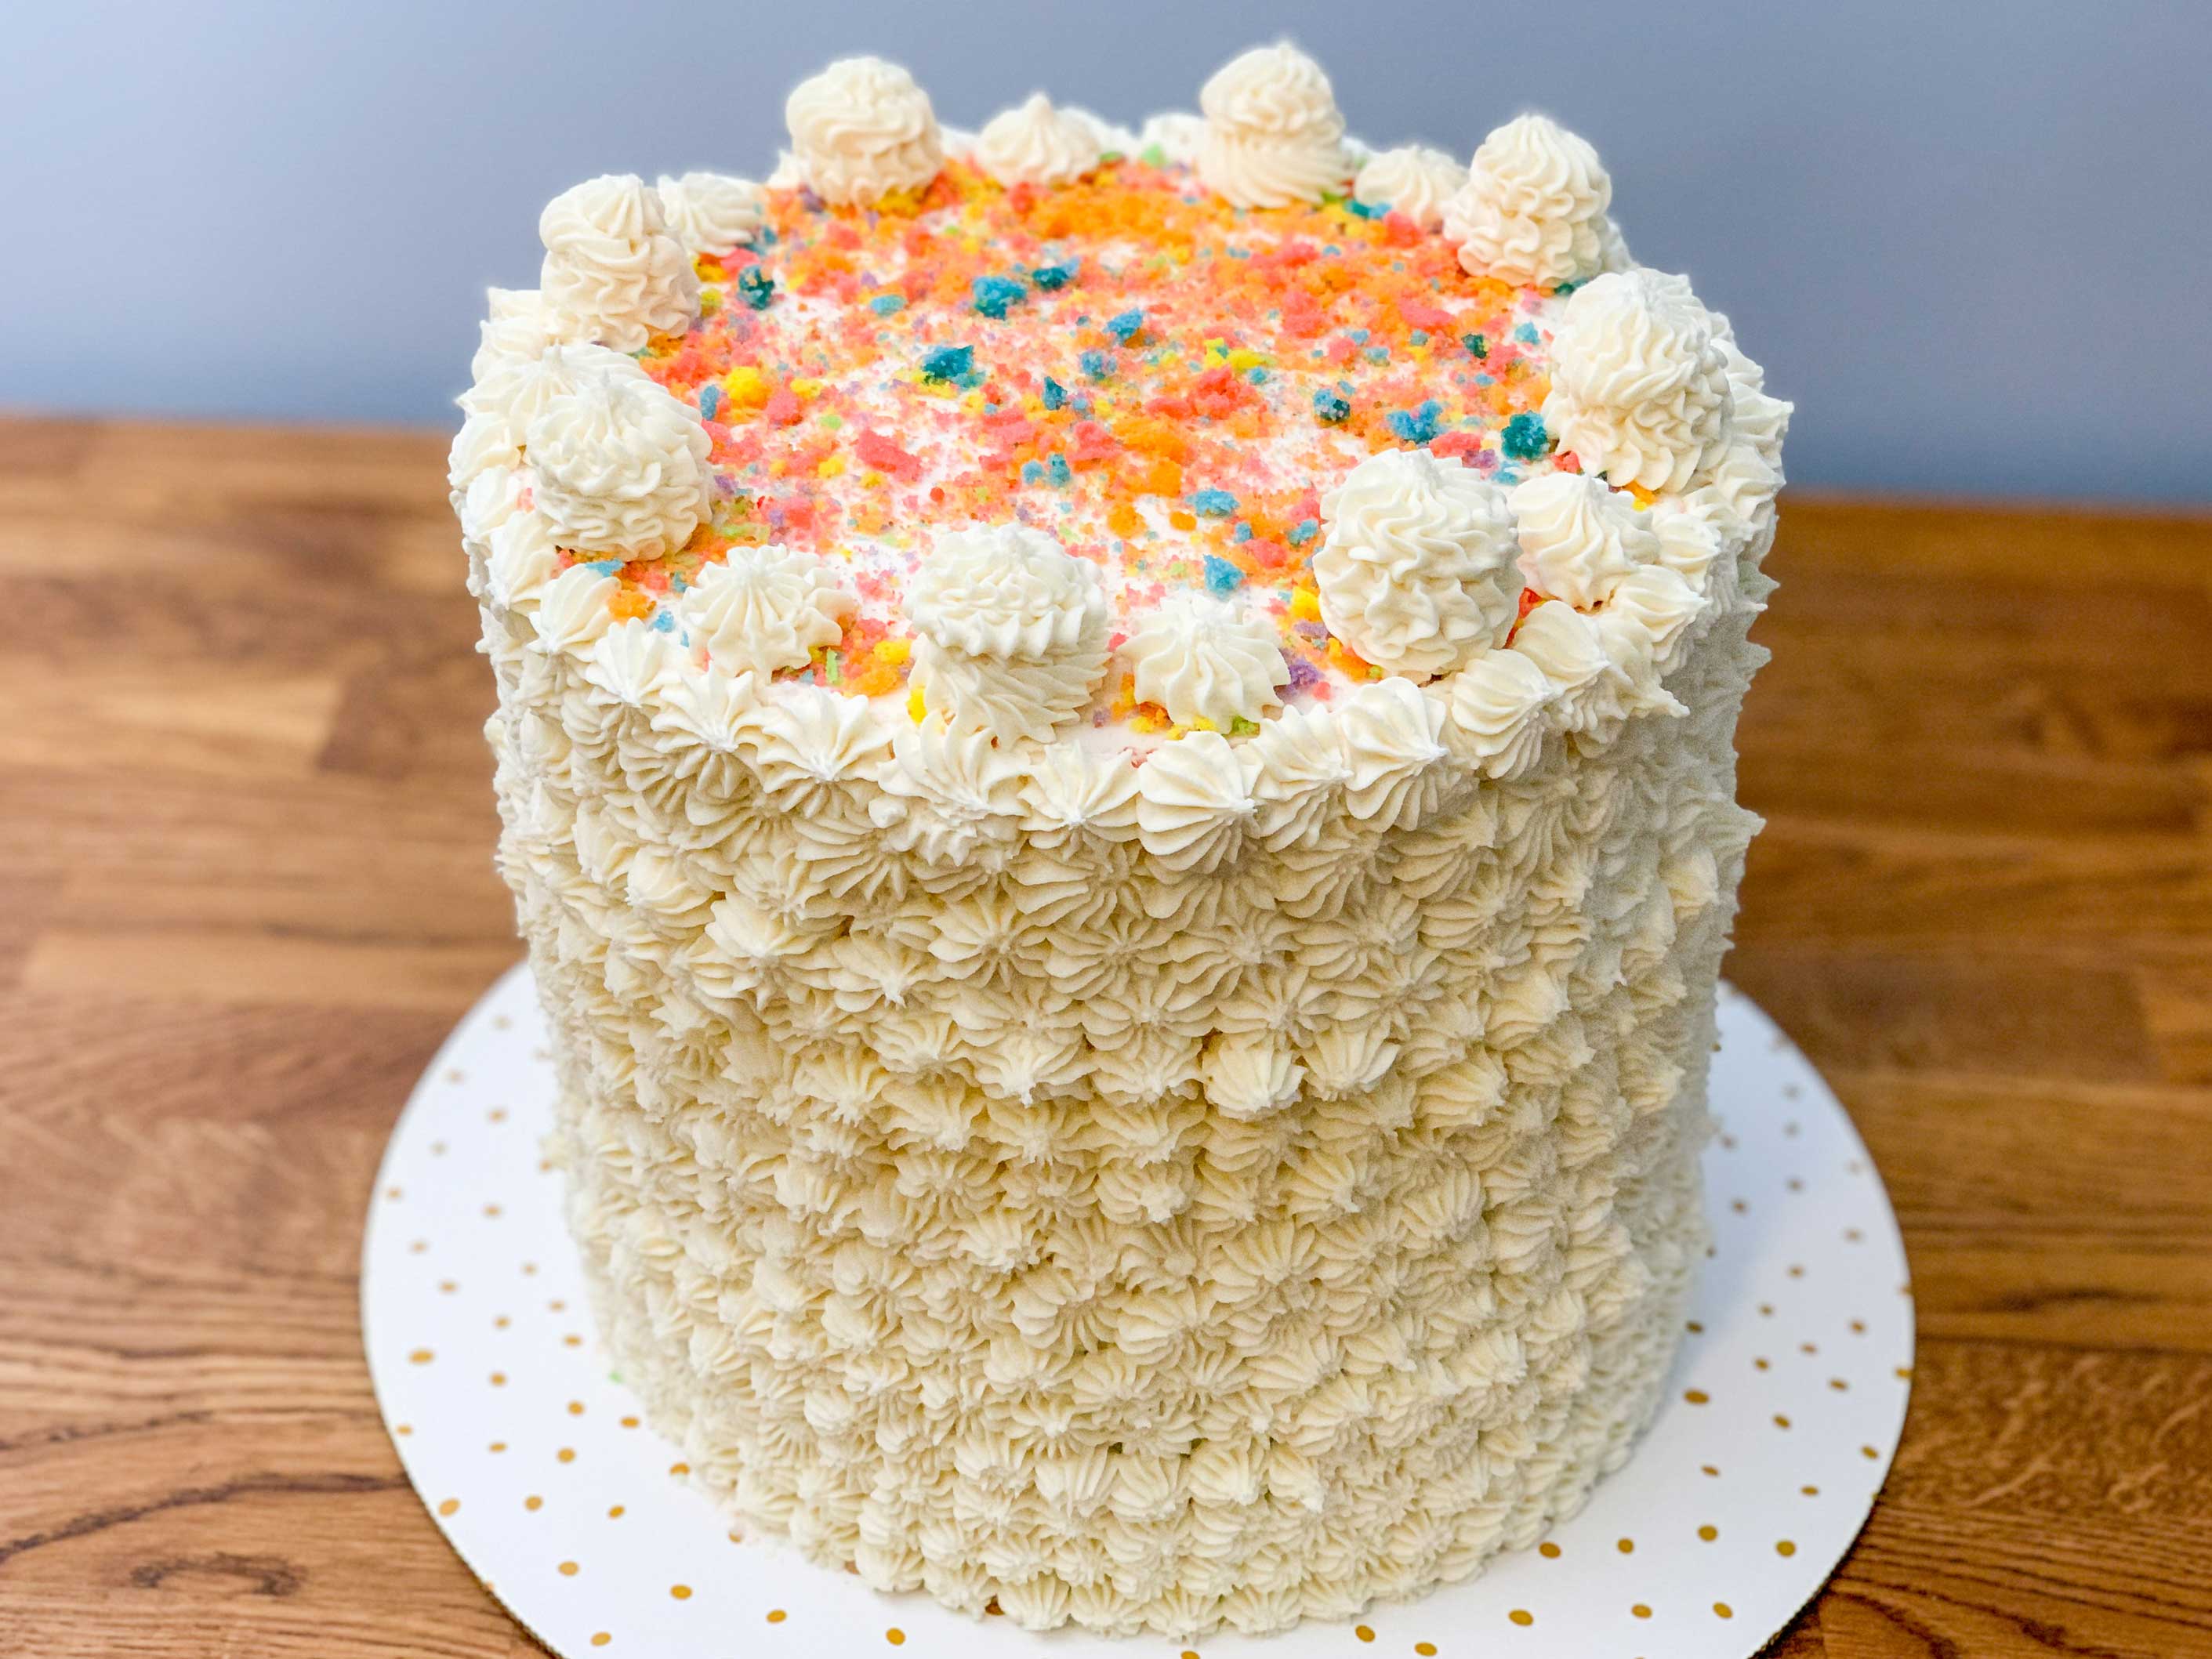 finished cake covered in white buttercream frosting, and rainbow cake crumbs sprinkled on top